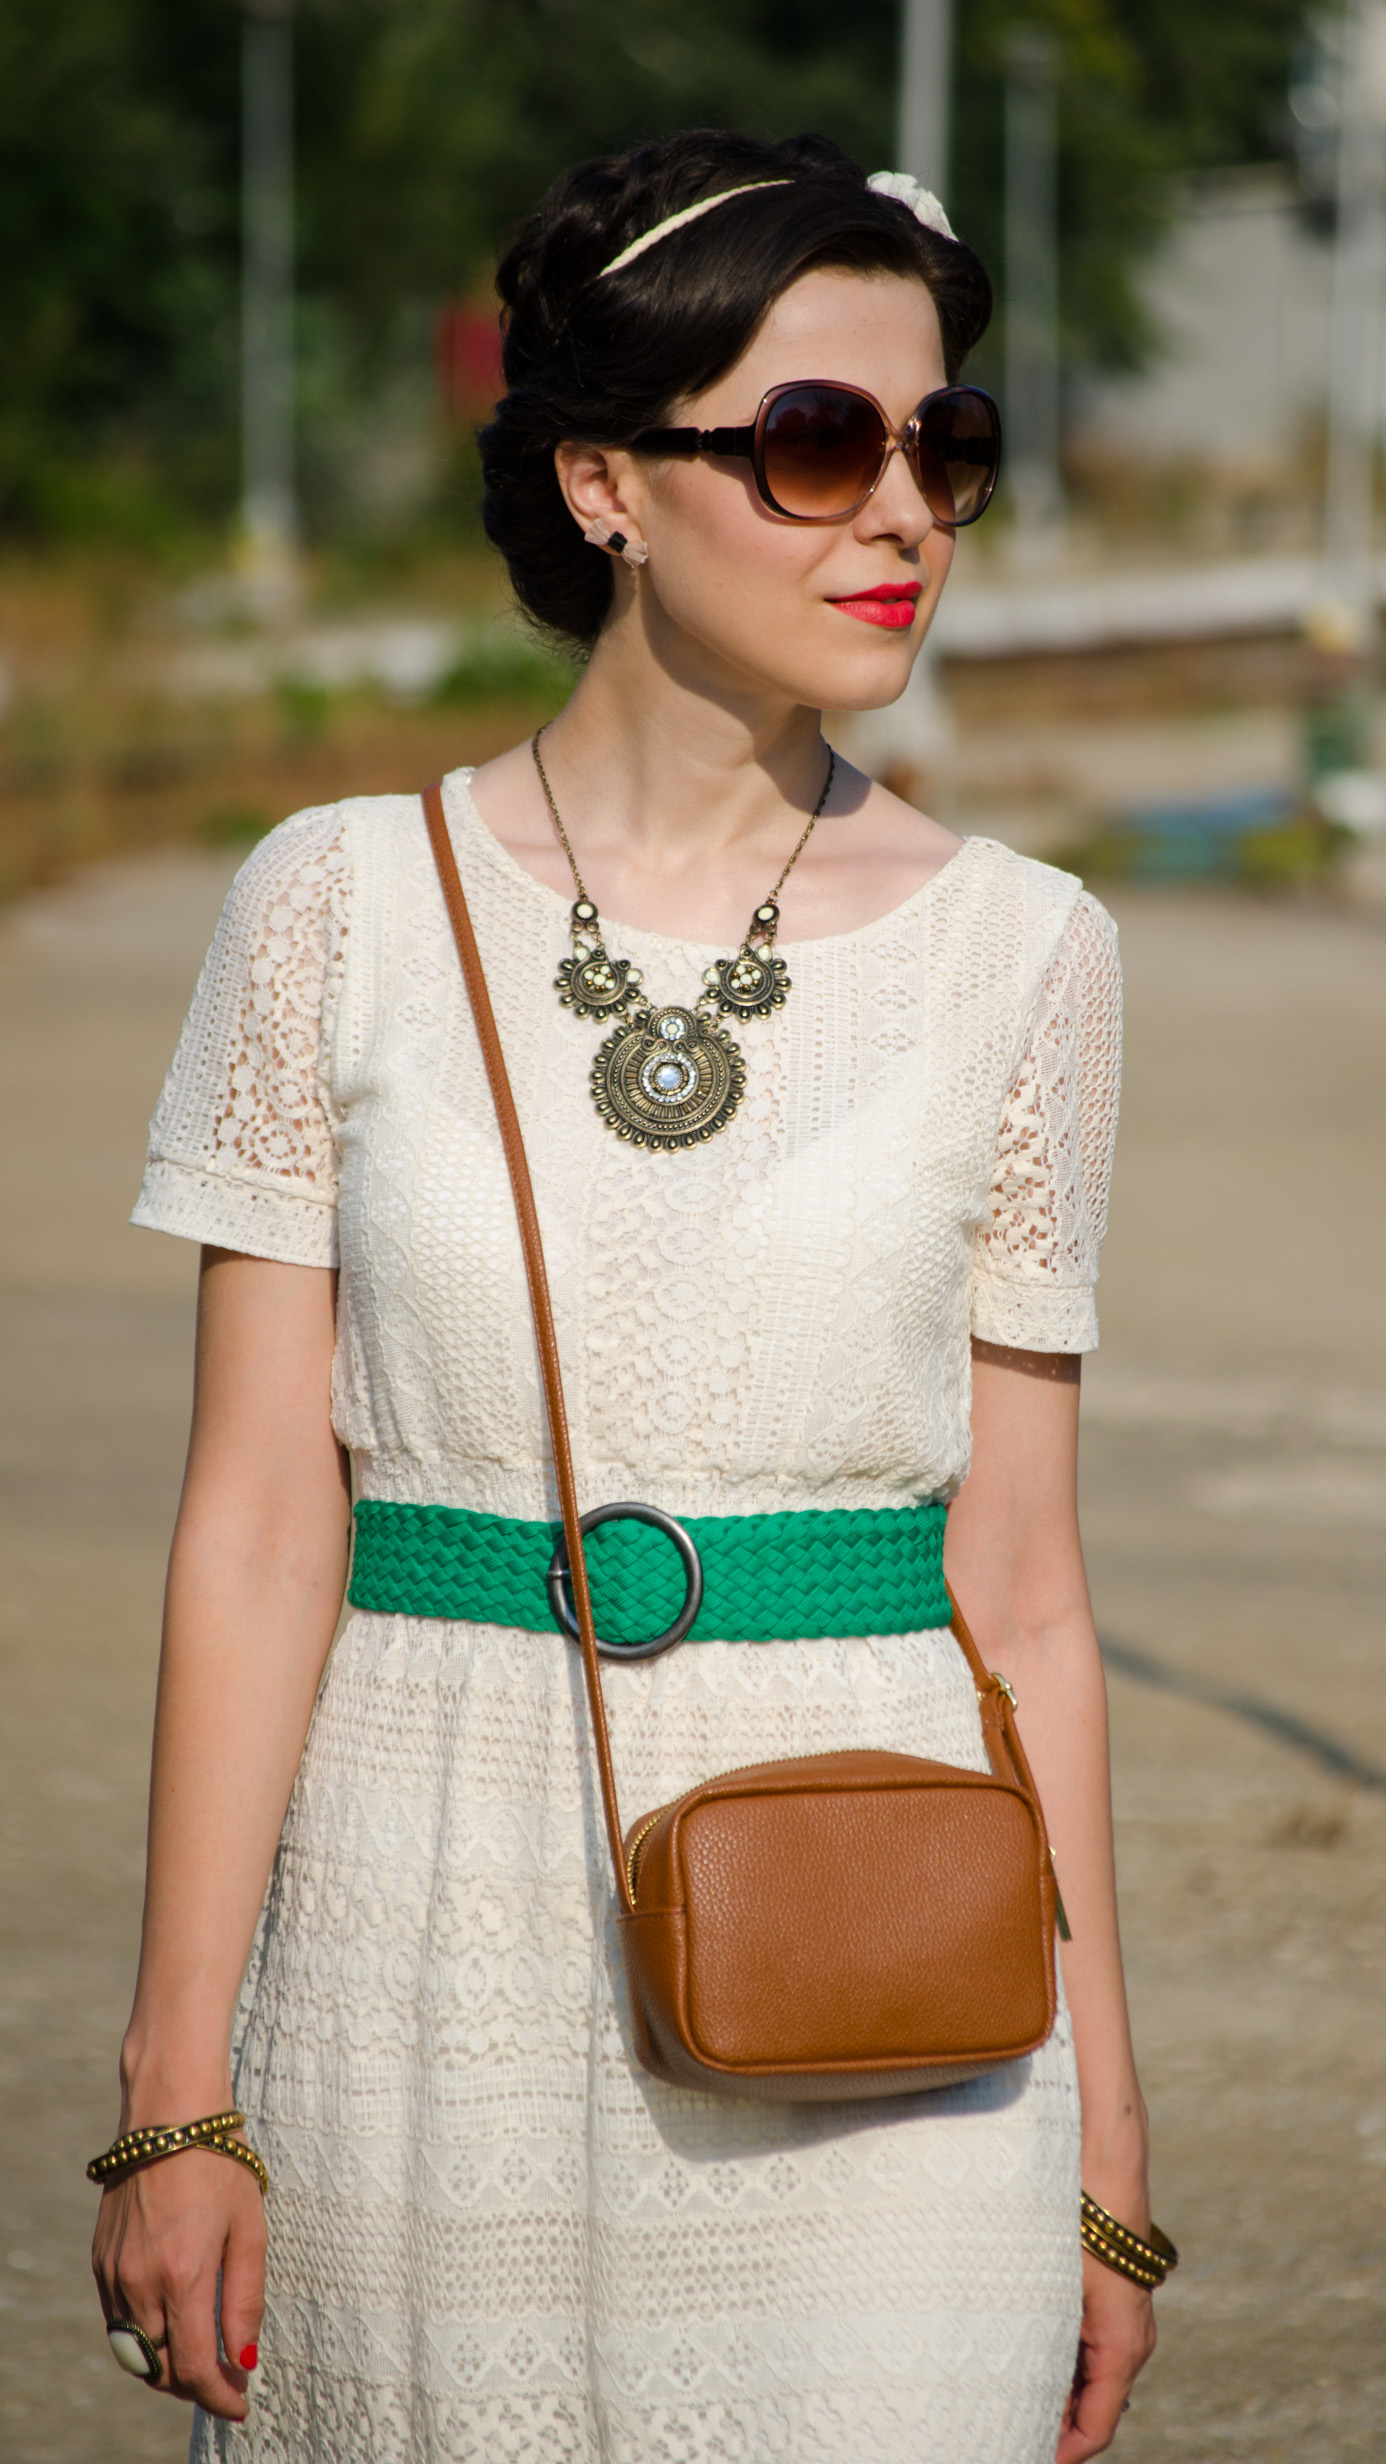 boho chic cotton lace dress koton green belt strap green nude shoes statement necklace h&m small brown satchel ivory